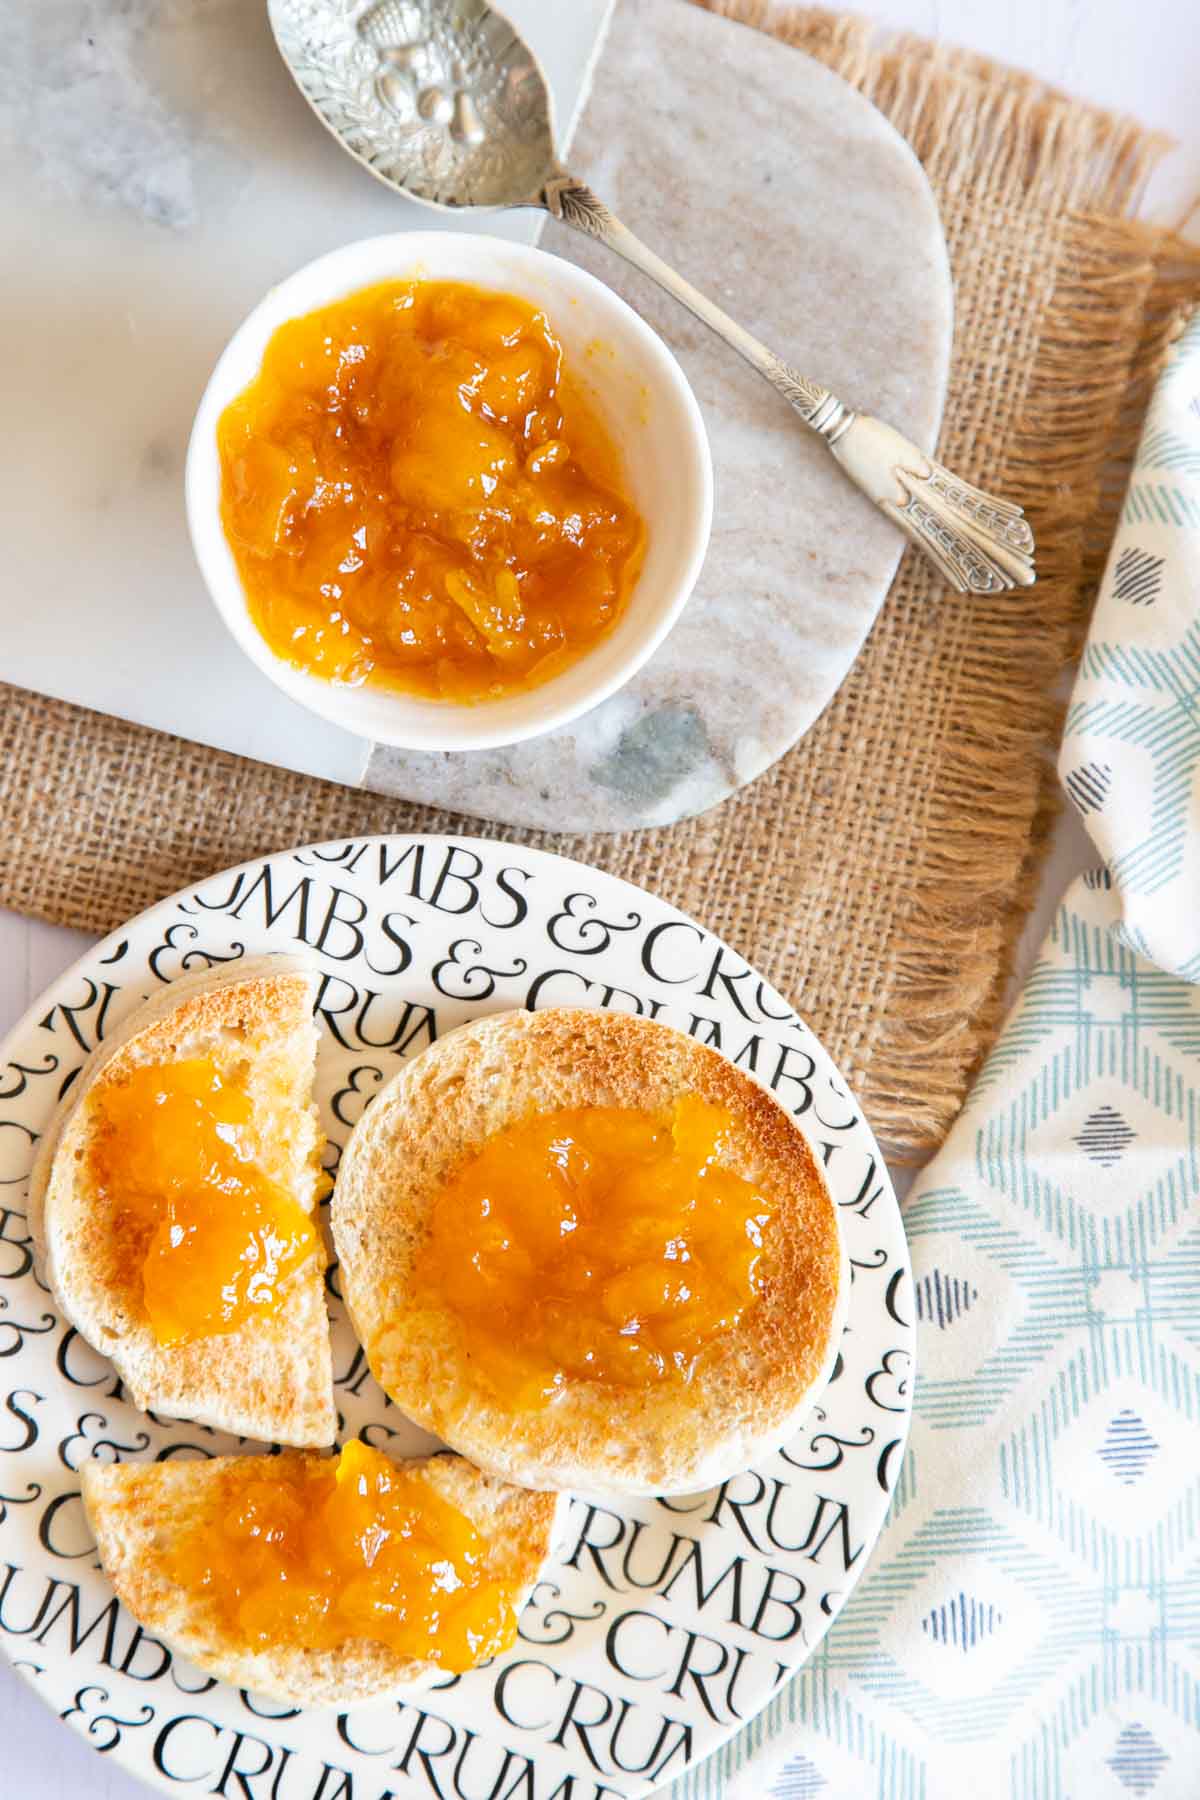 Mango jam on muffins, with a dish of mango jam and a fancy silver spoon, shown from above.